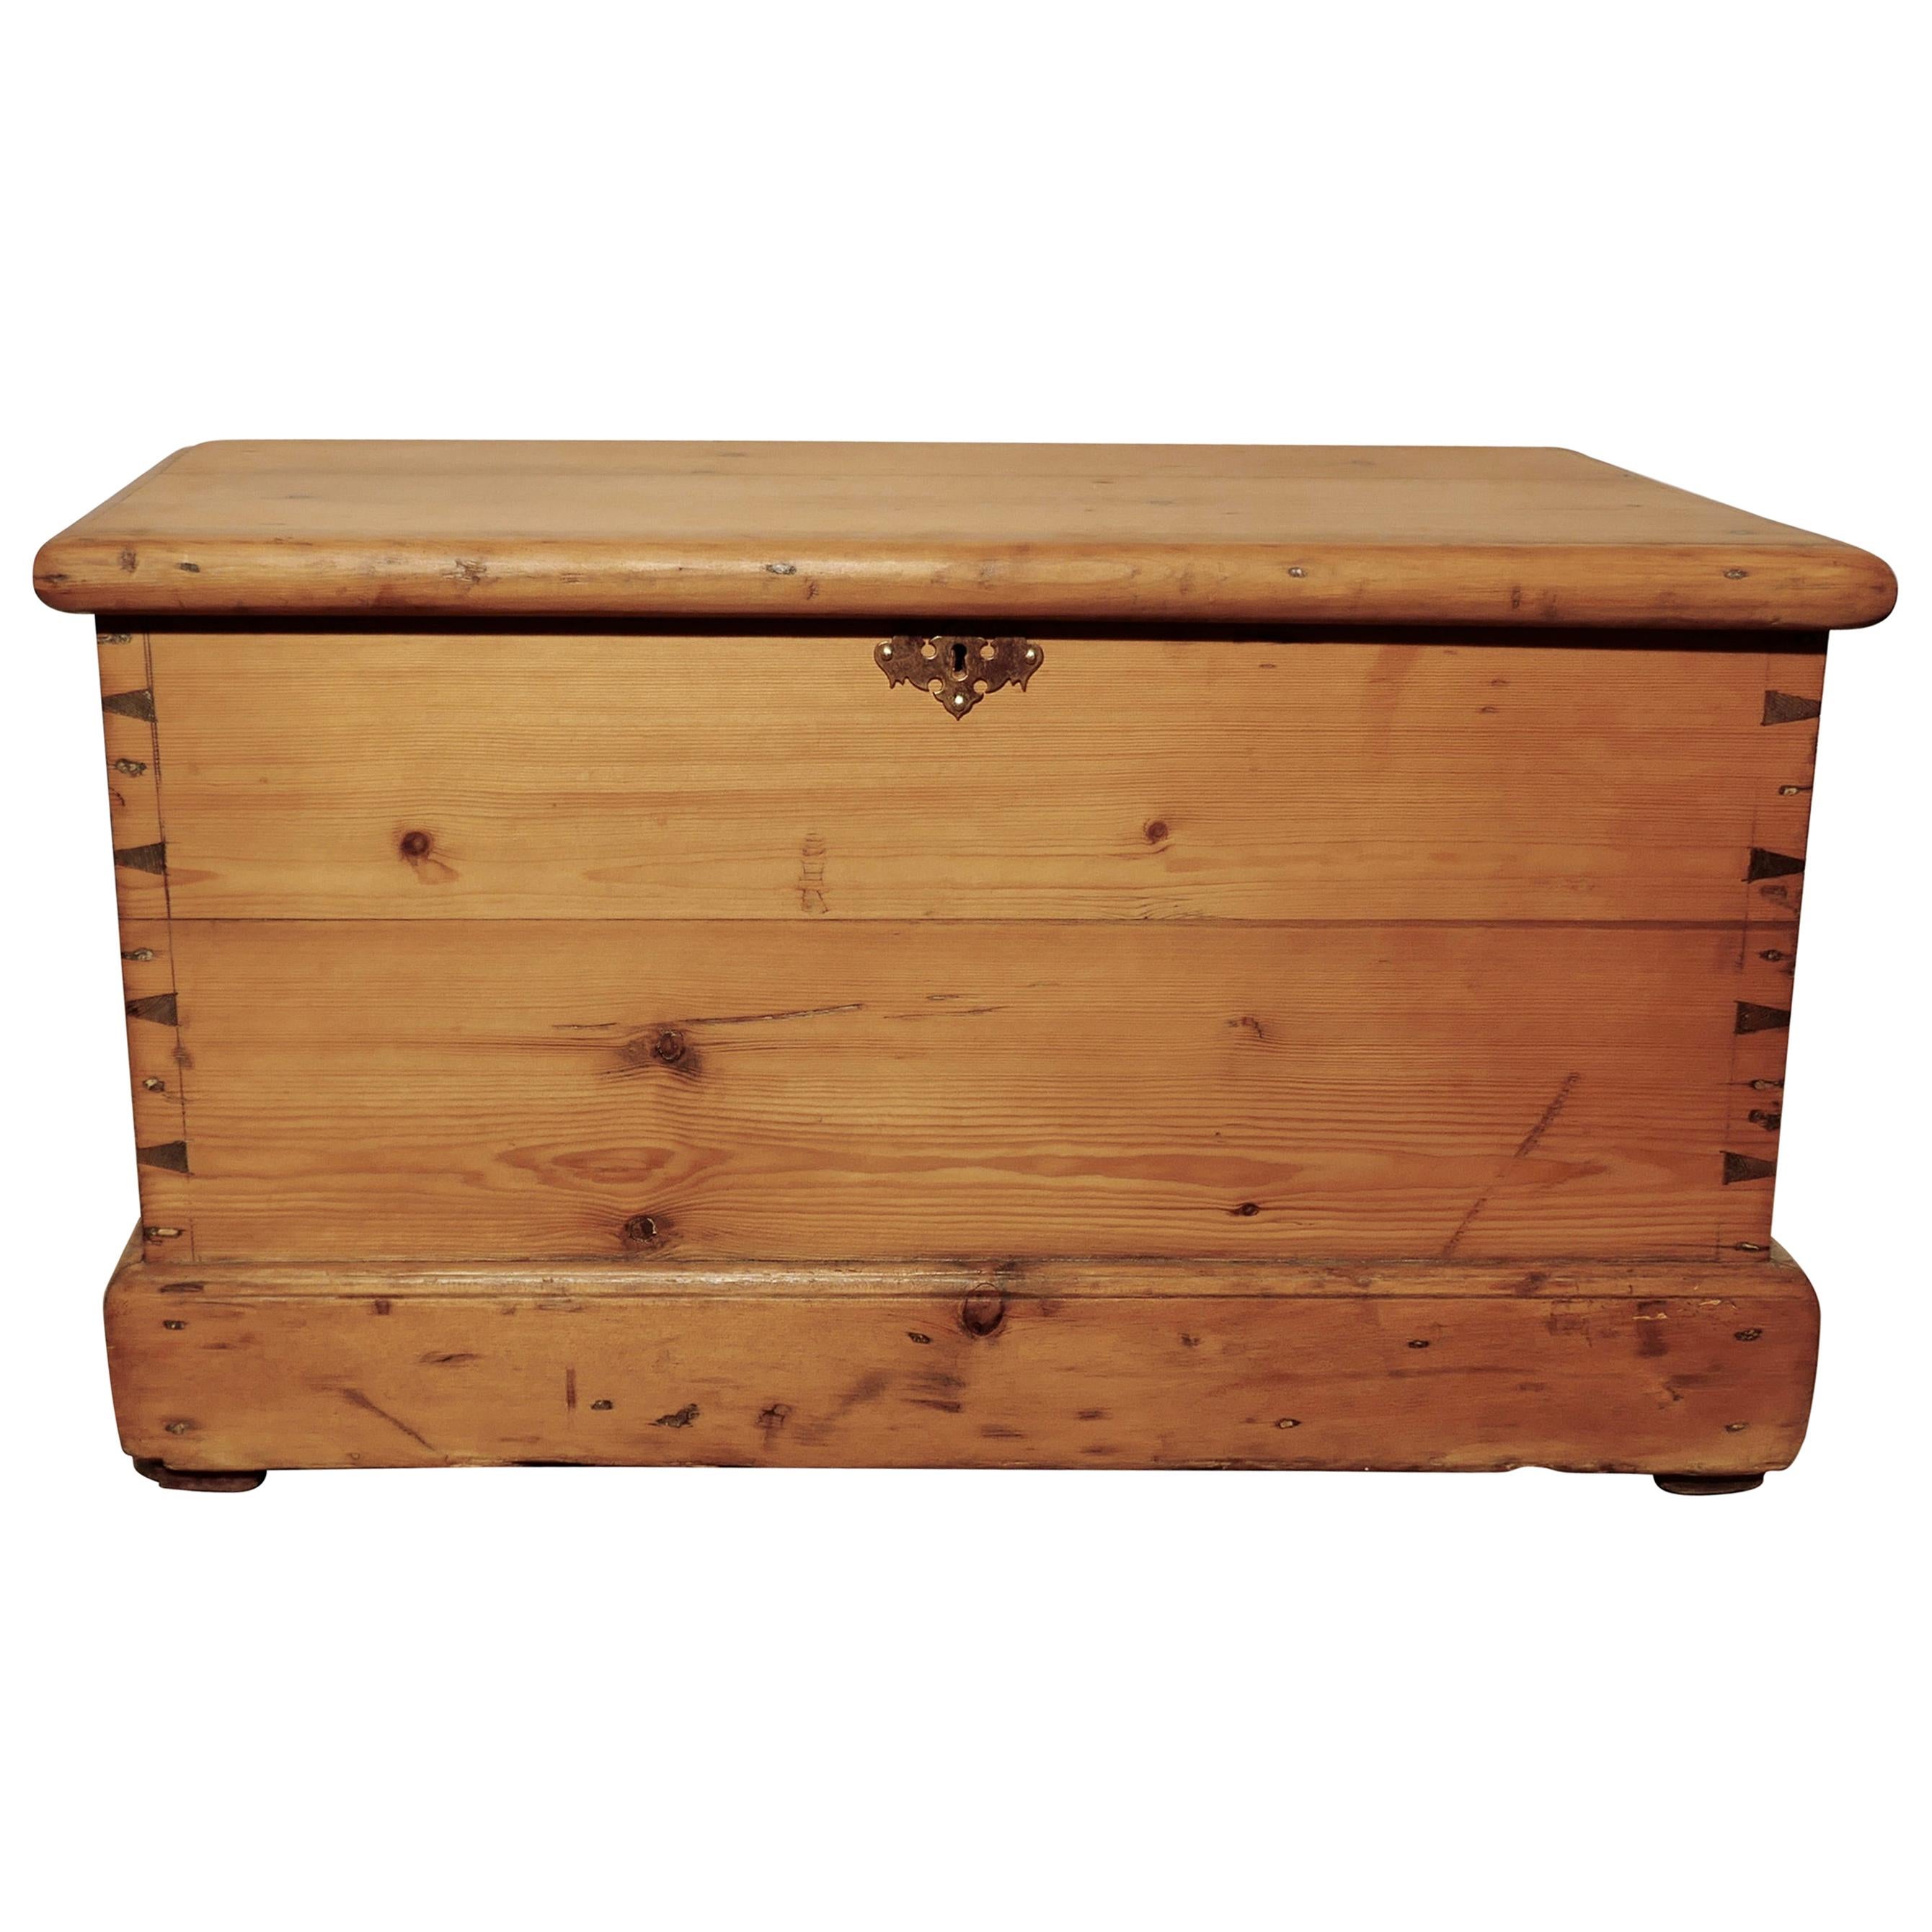 Early Victorian Pine Chest, Blanket Box or Coffee Table